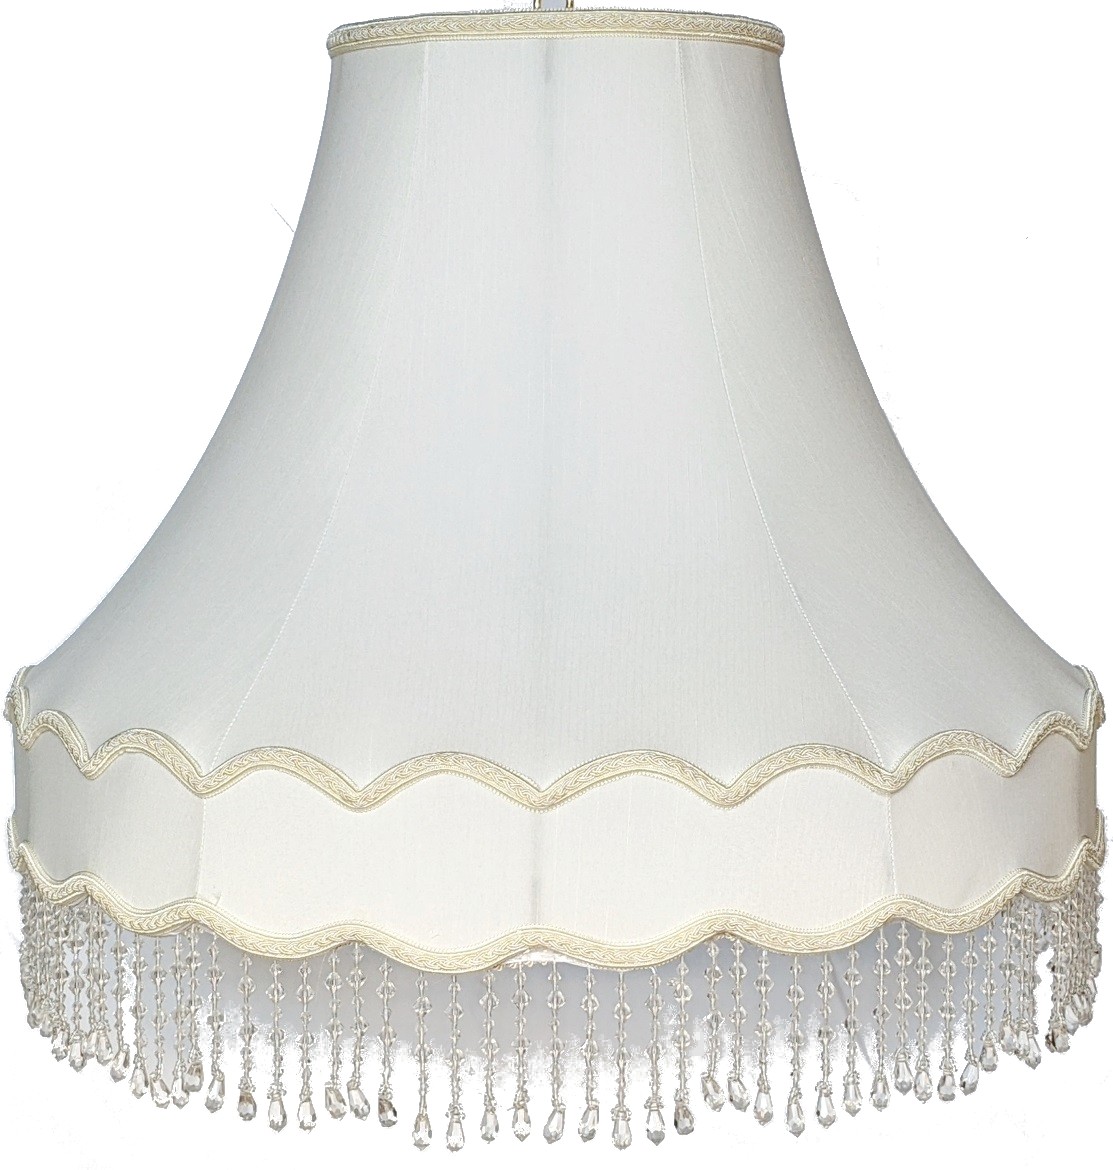 Gallery Bell Victorian Lamp Shade w/Beads & Fringes 14-20"W